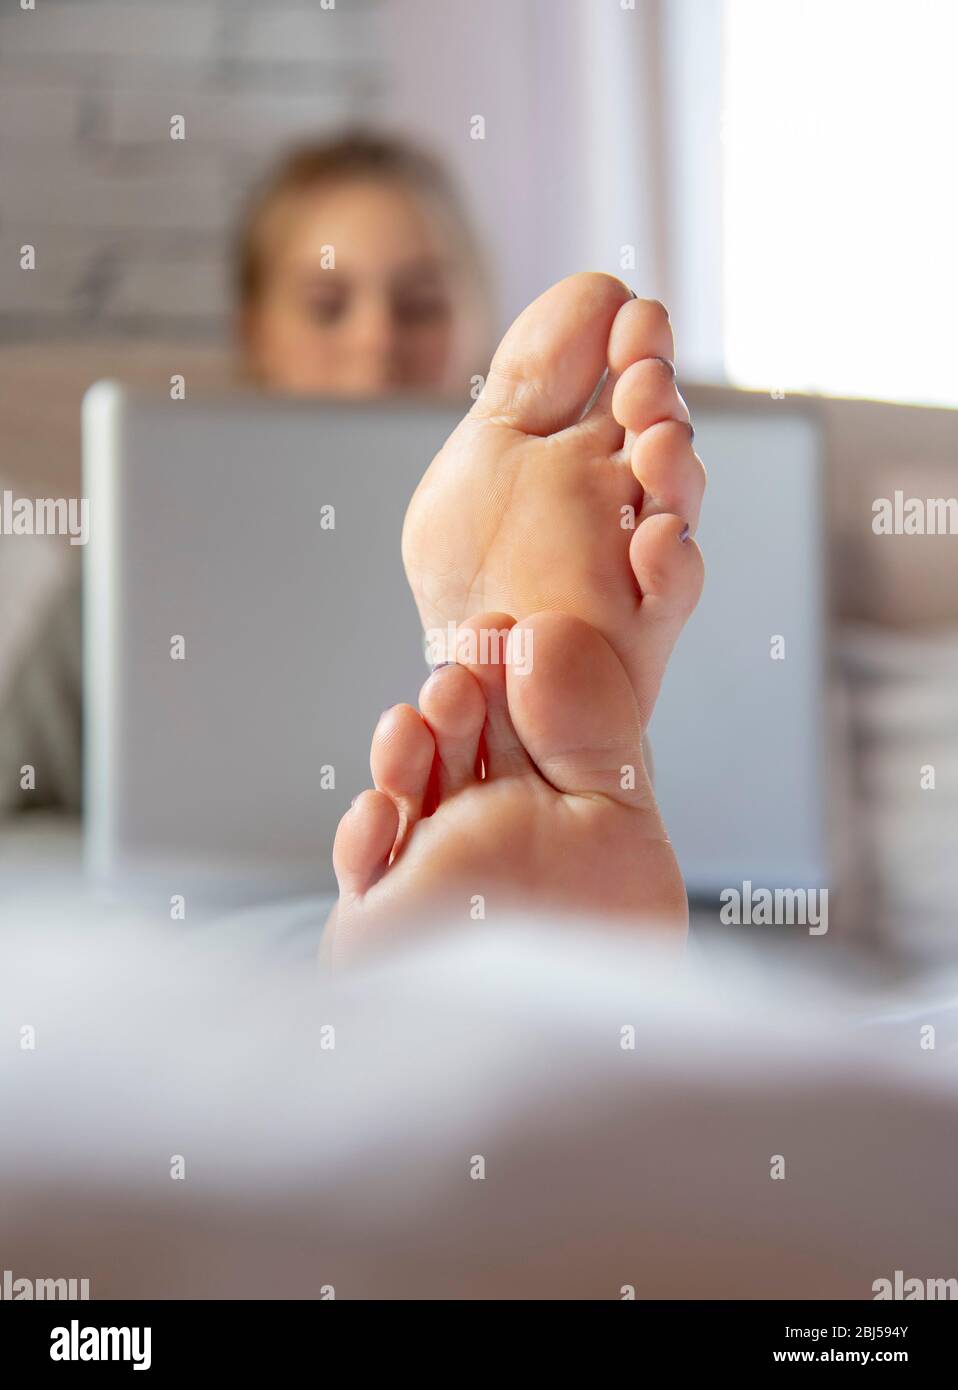 How To Sell Feet Pics as a Teenager?